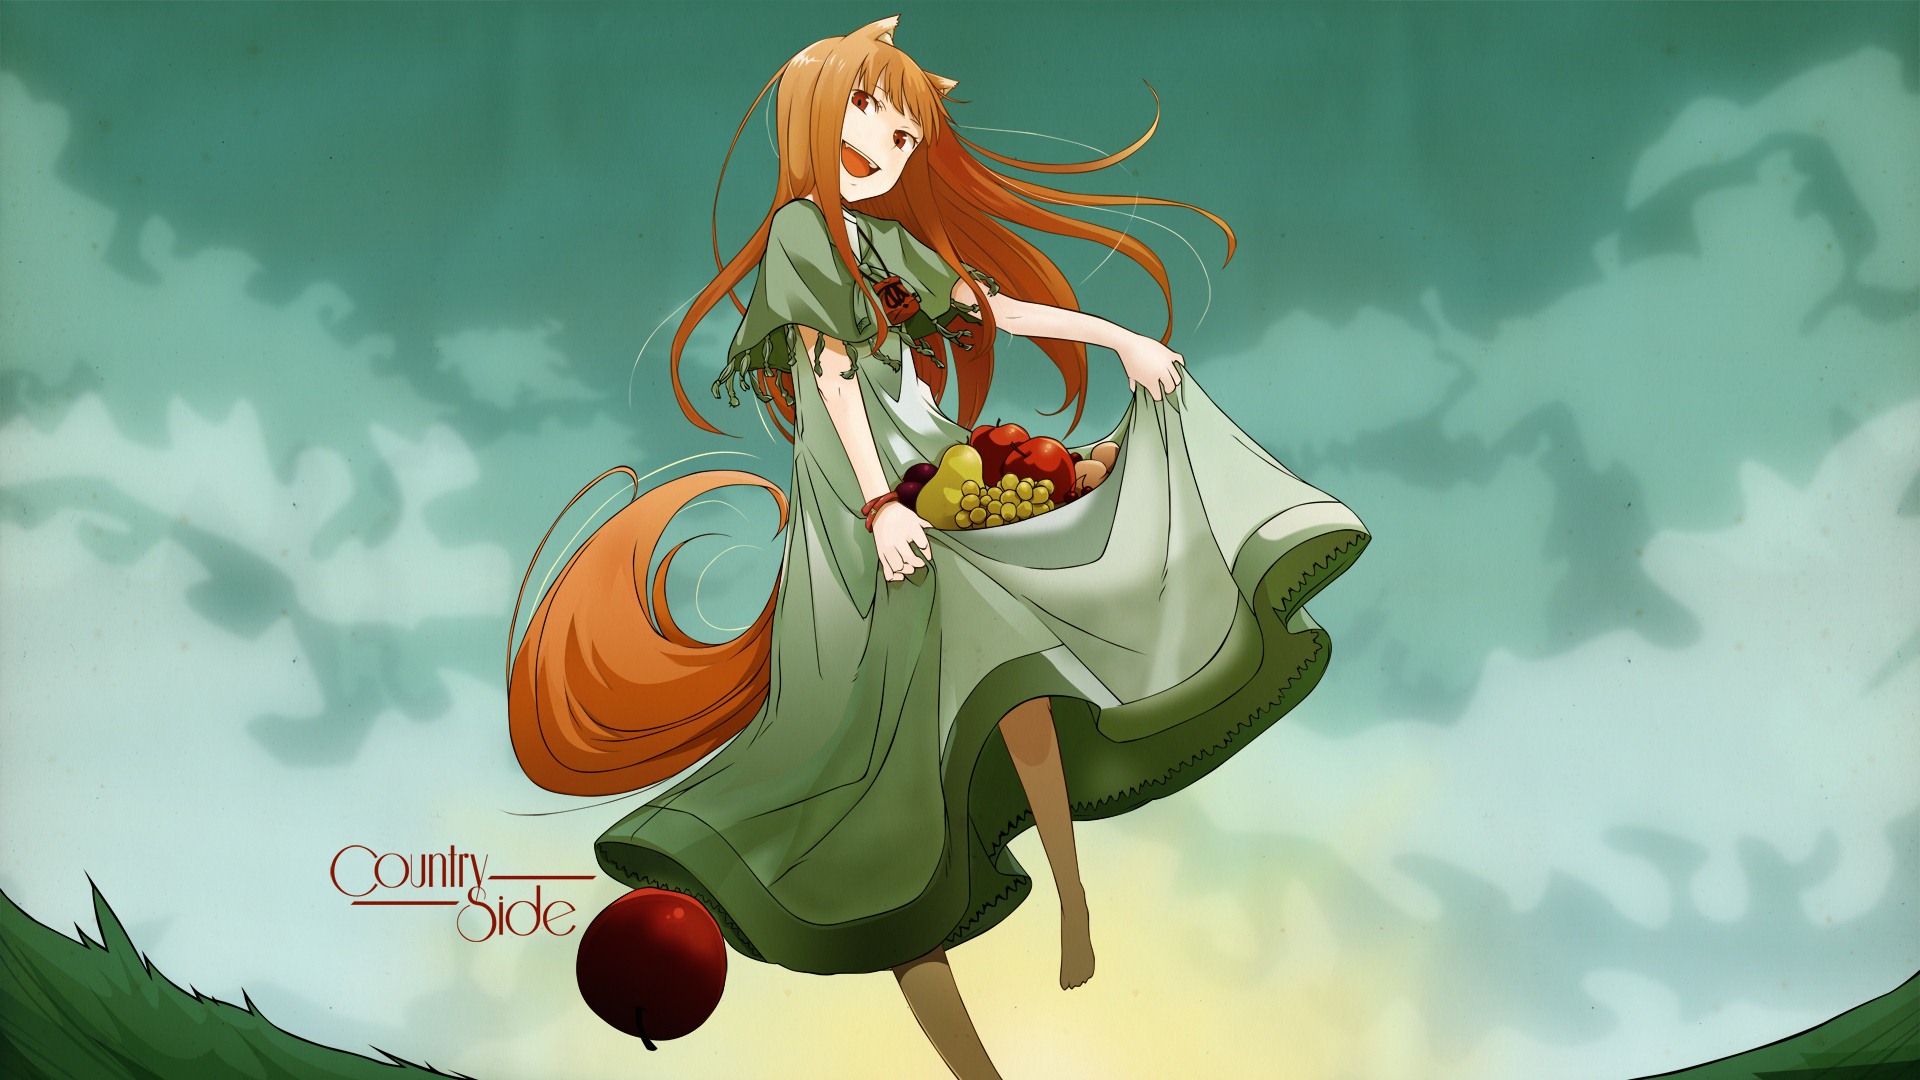 Spice and Wolf HD Wallpaper #19 - 1920x1080